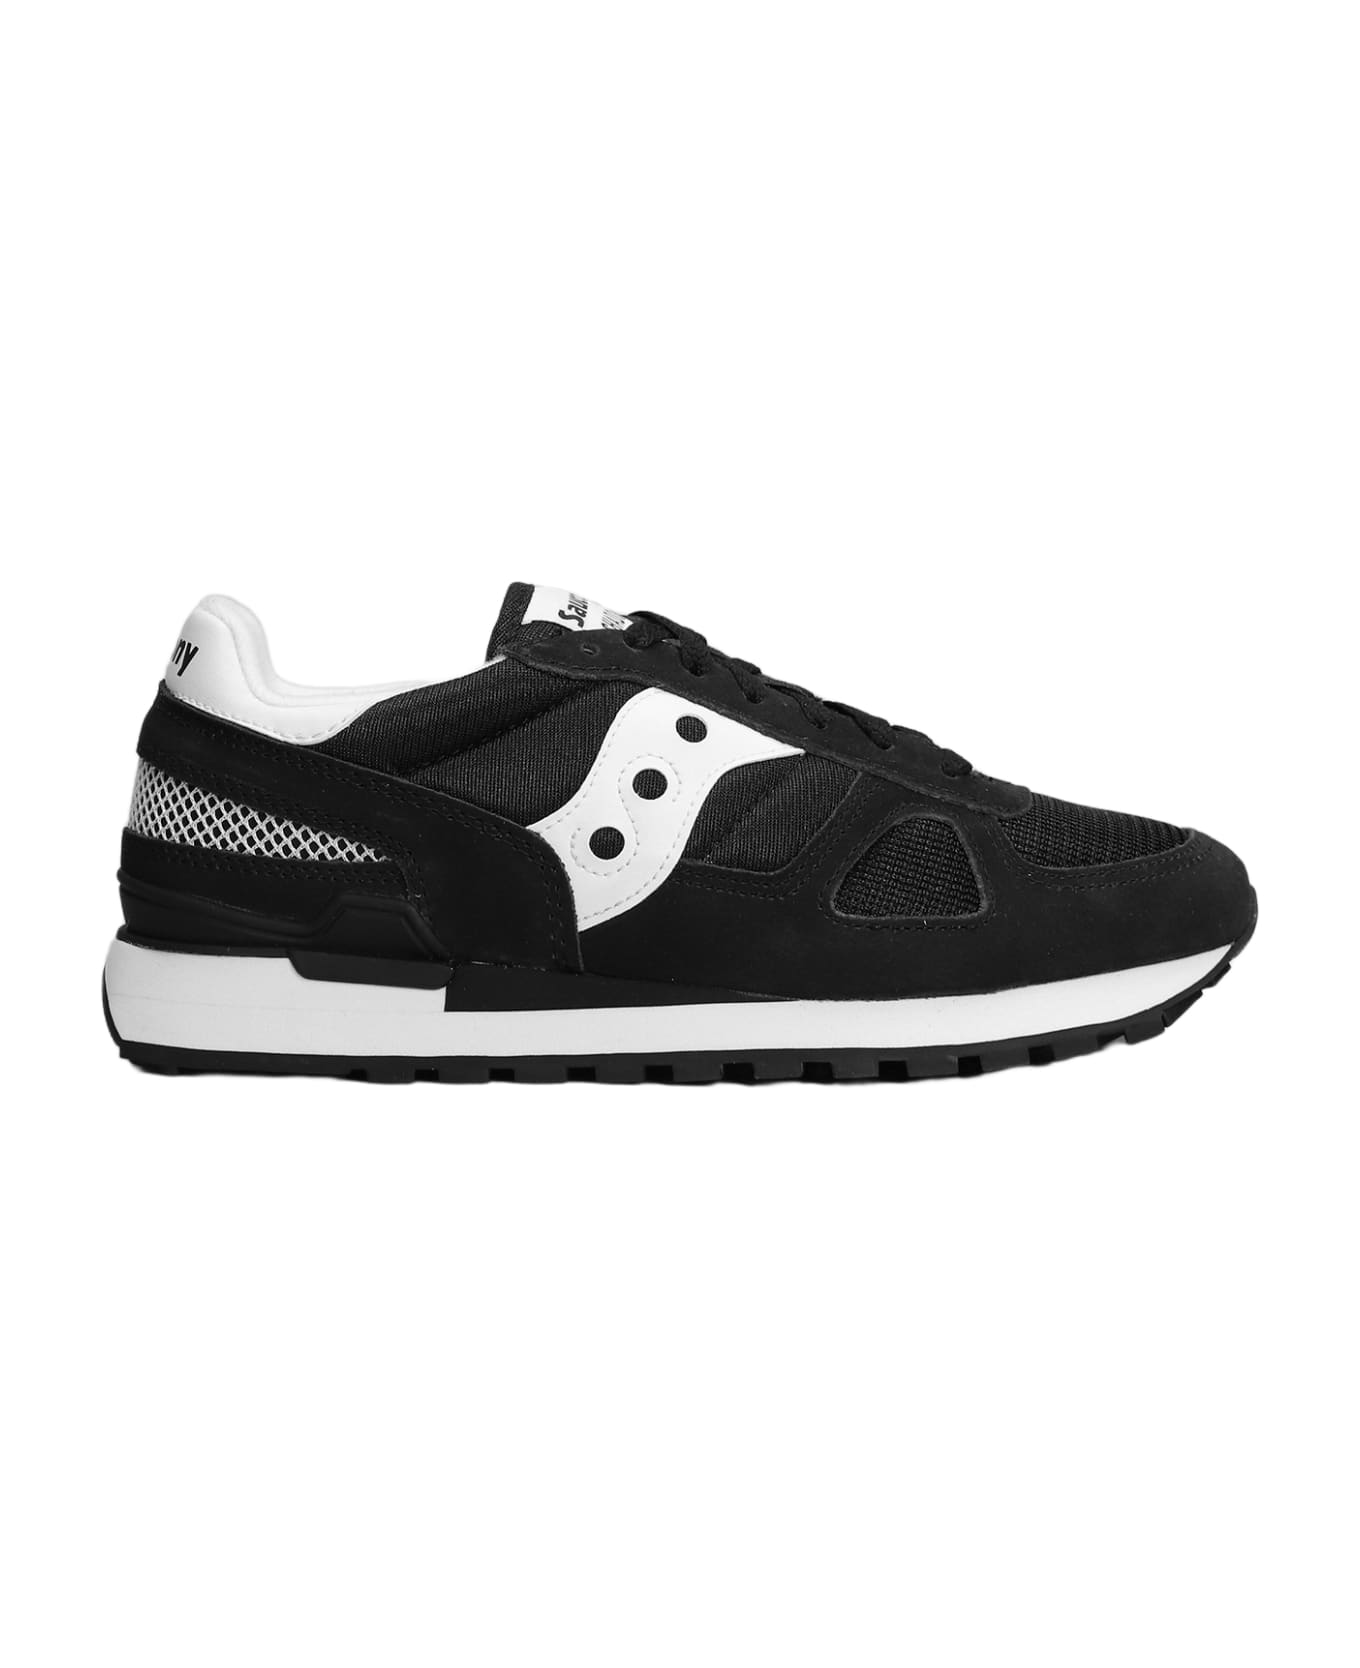 Saucony Shadow Original Sneakers In Black Suede And Fabric - Black Boston スニーカー